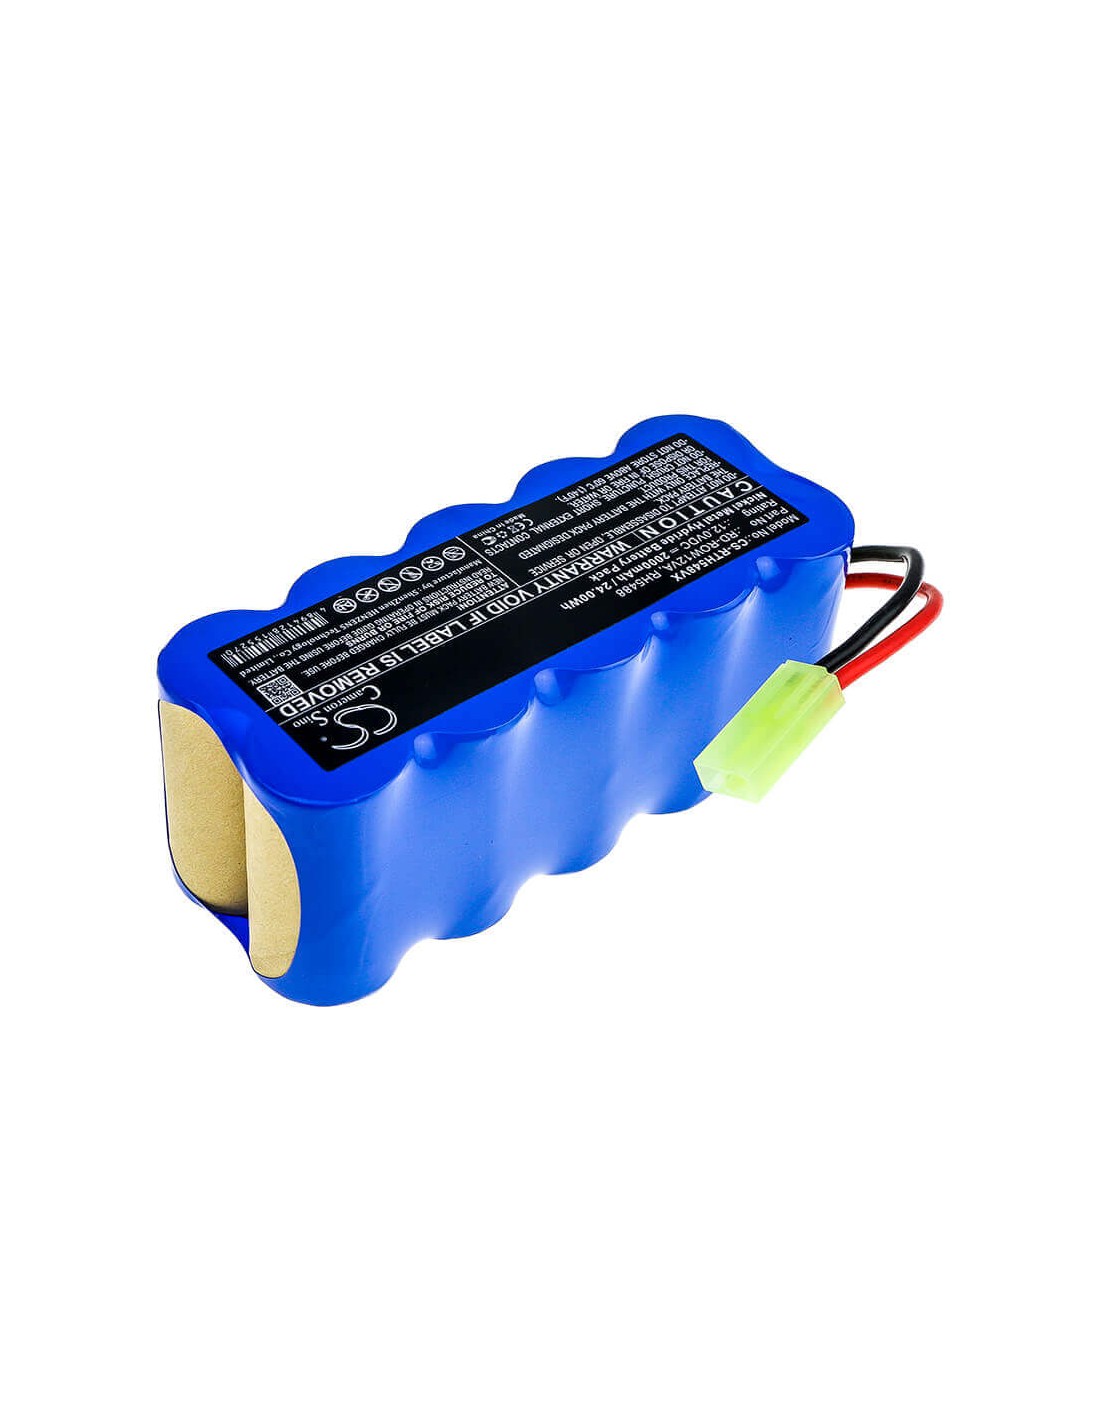 Battery for Rowenta, Rh5488, Rh8460wh / A 9-0, Rh8460wh/9a0 12V, 2000mAh - 24.00Wh